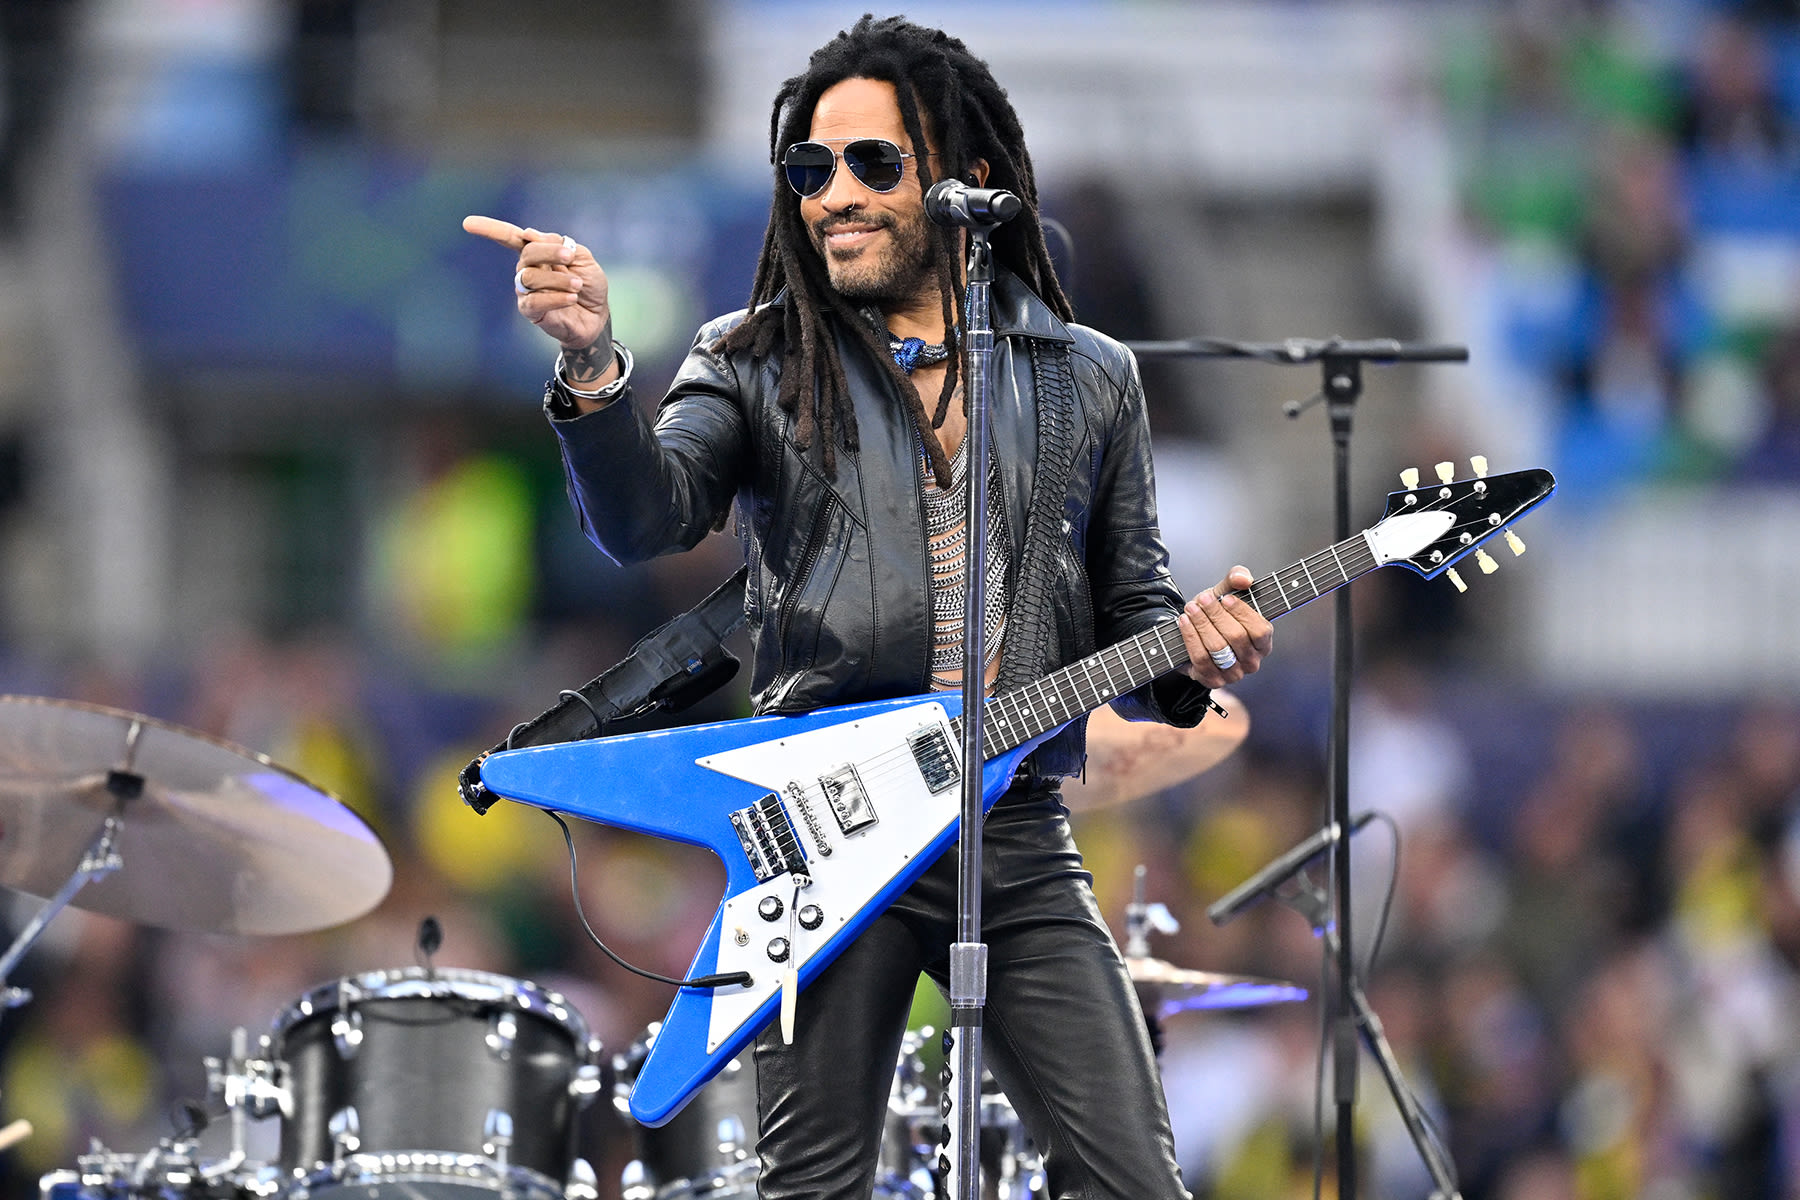 Lenny Kravitz’s Las Vegas Residency: Where to Get Tickets to the ‘Blue Electric Light’ Shows